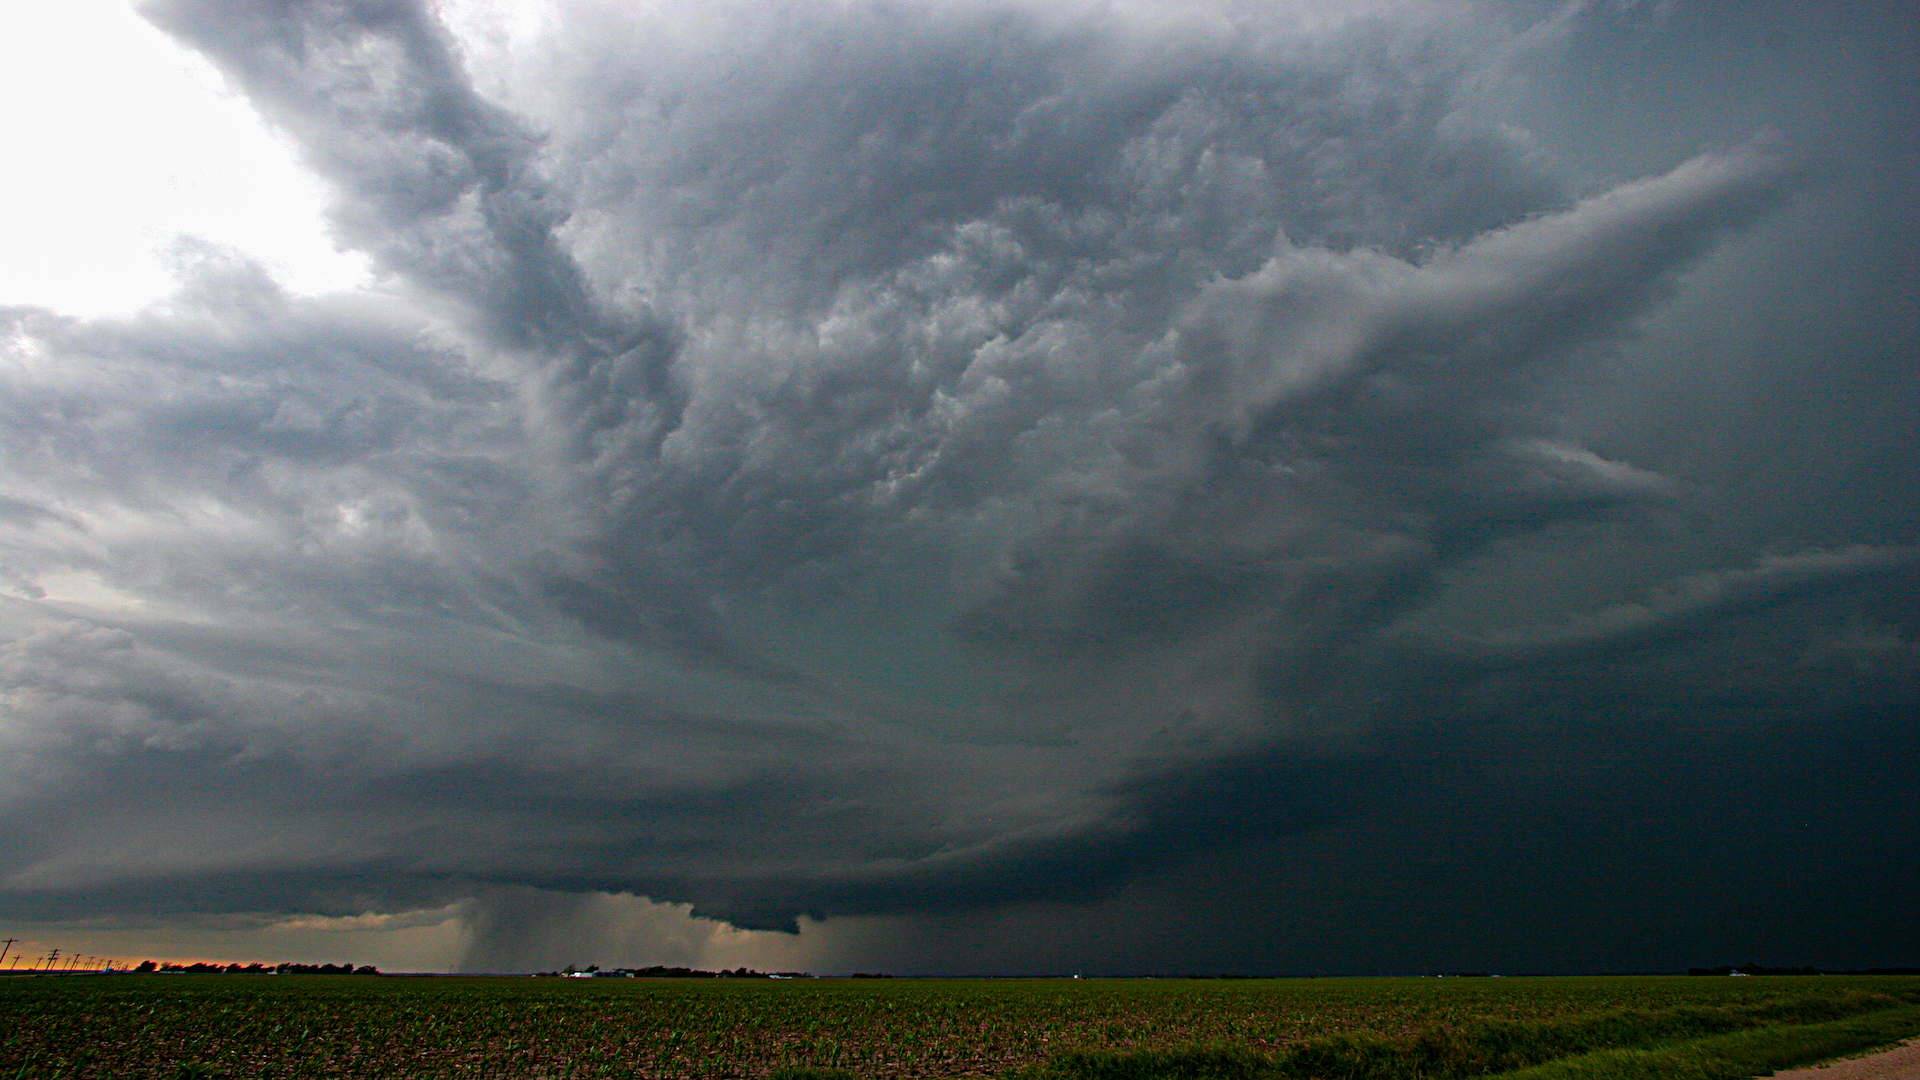 Monster Storms Screensaver - Extreme Weather Gallery